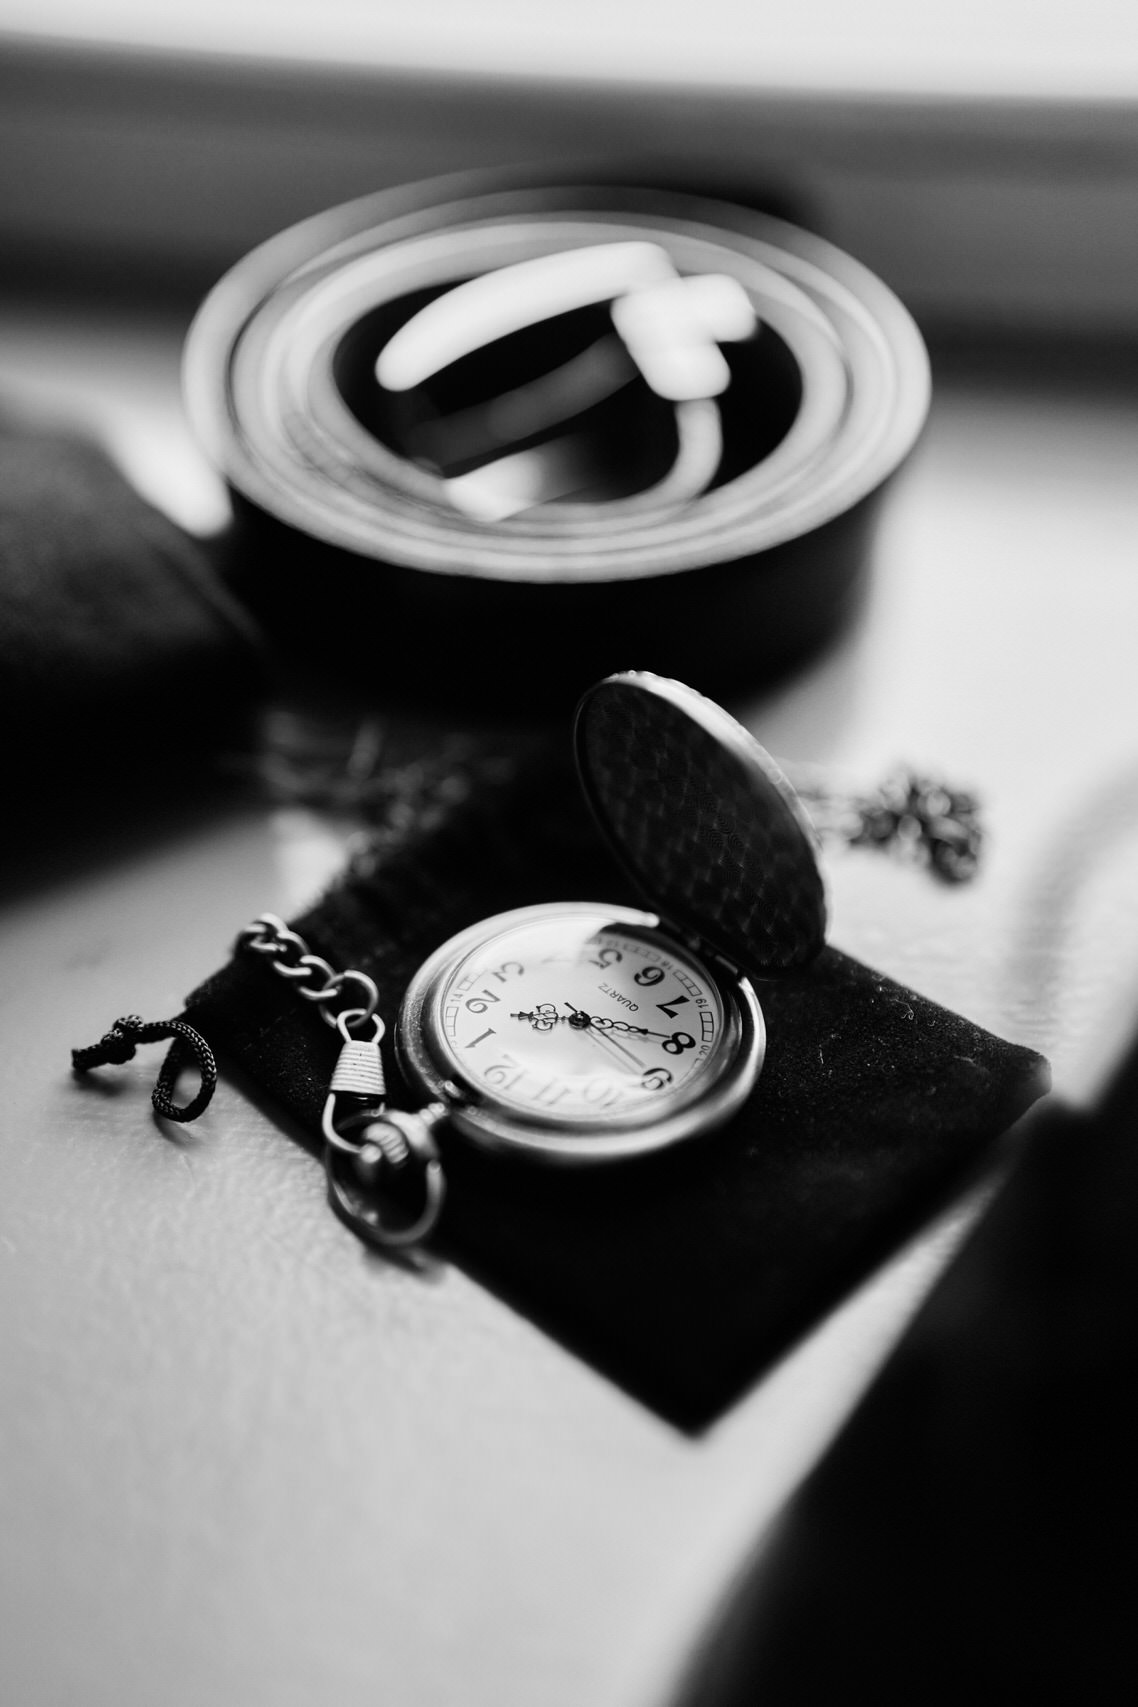 A picture of a pocket watch in black and white.